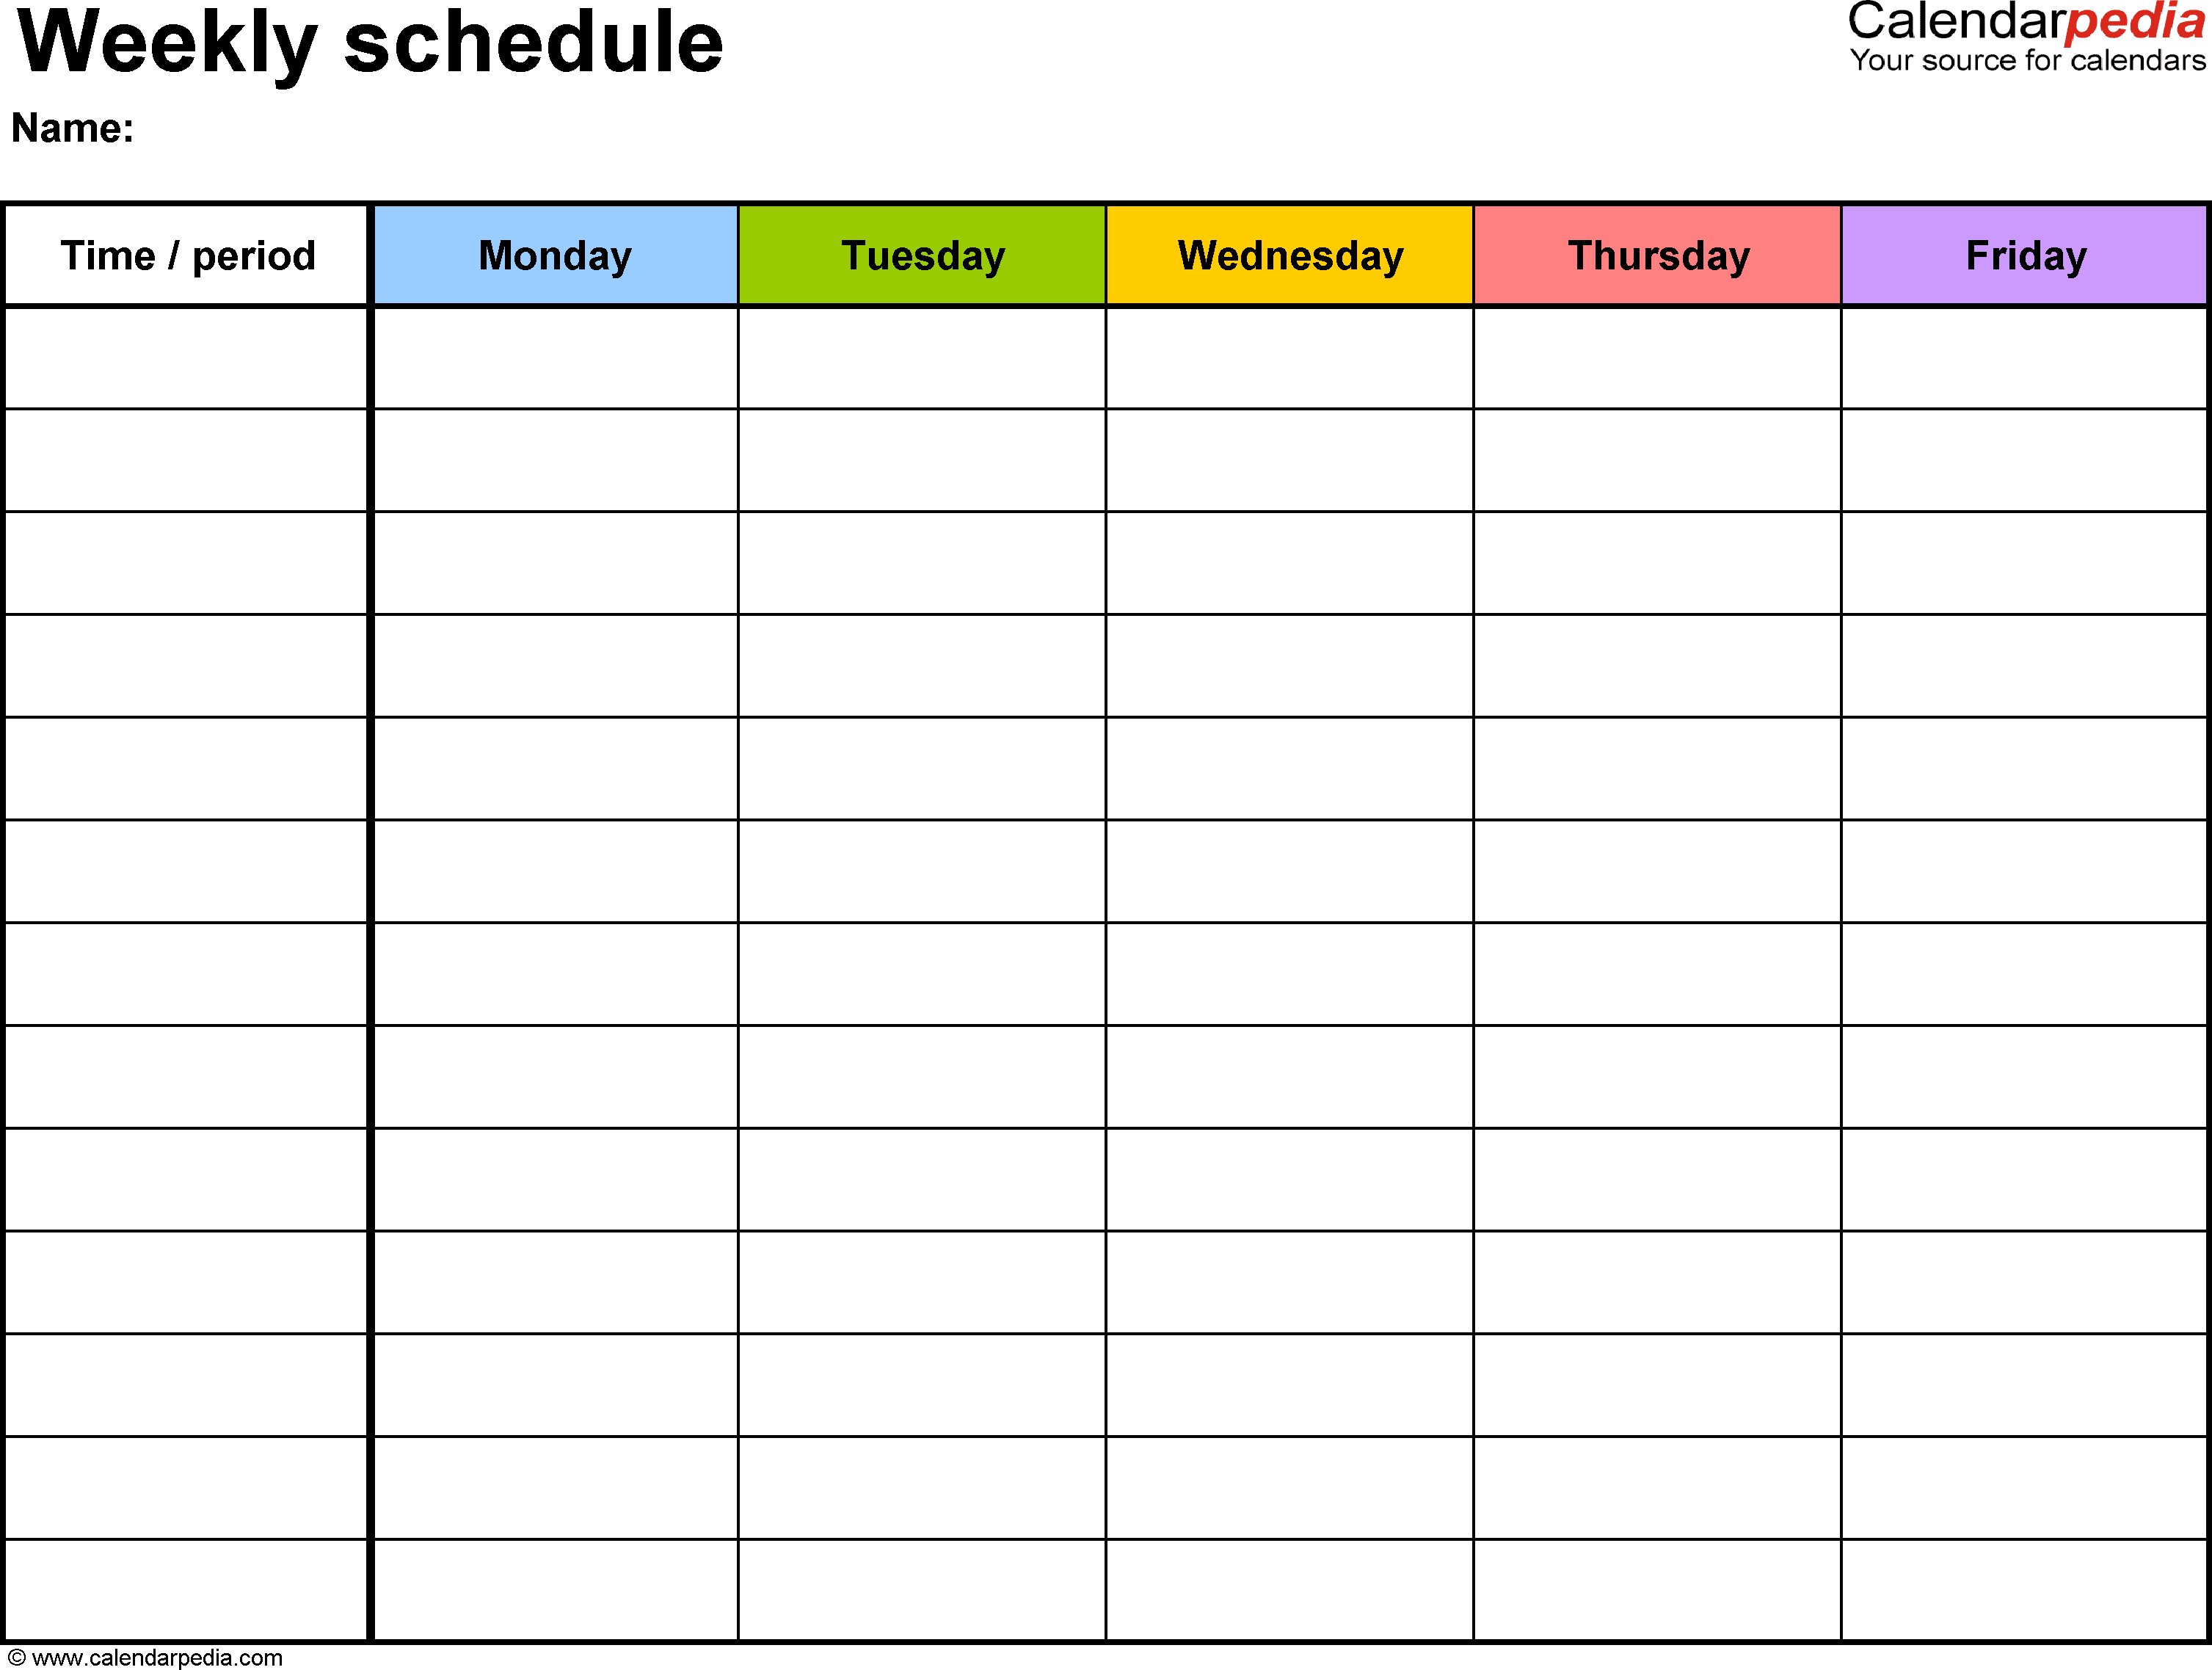 Free Weekly Schedule Templates For Word - 18 Templates - Free Printable Monthly Work Schedule Template